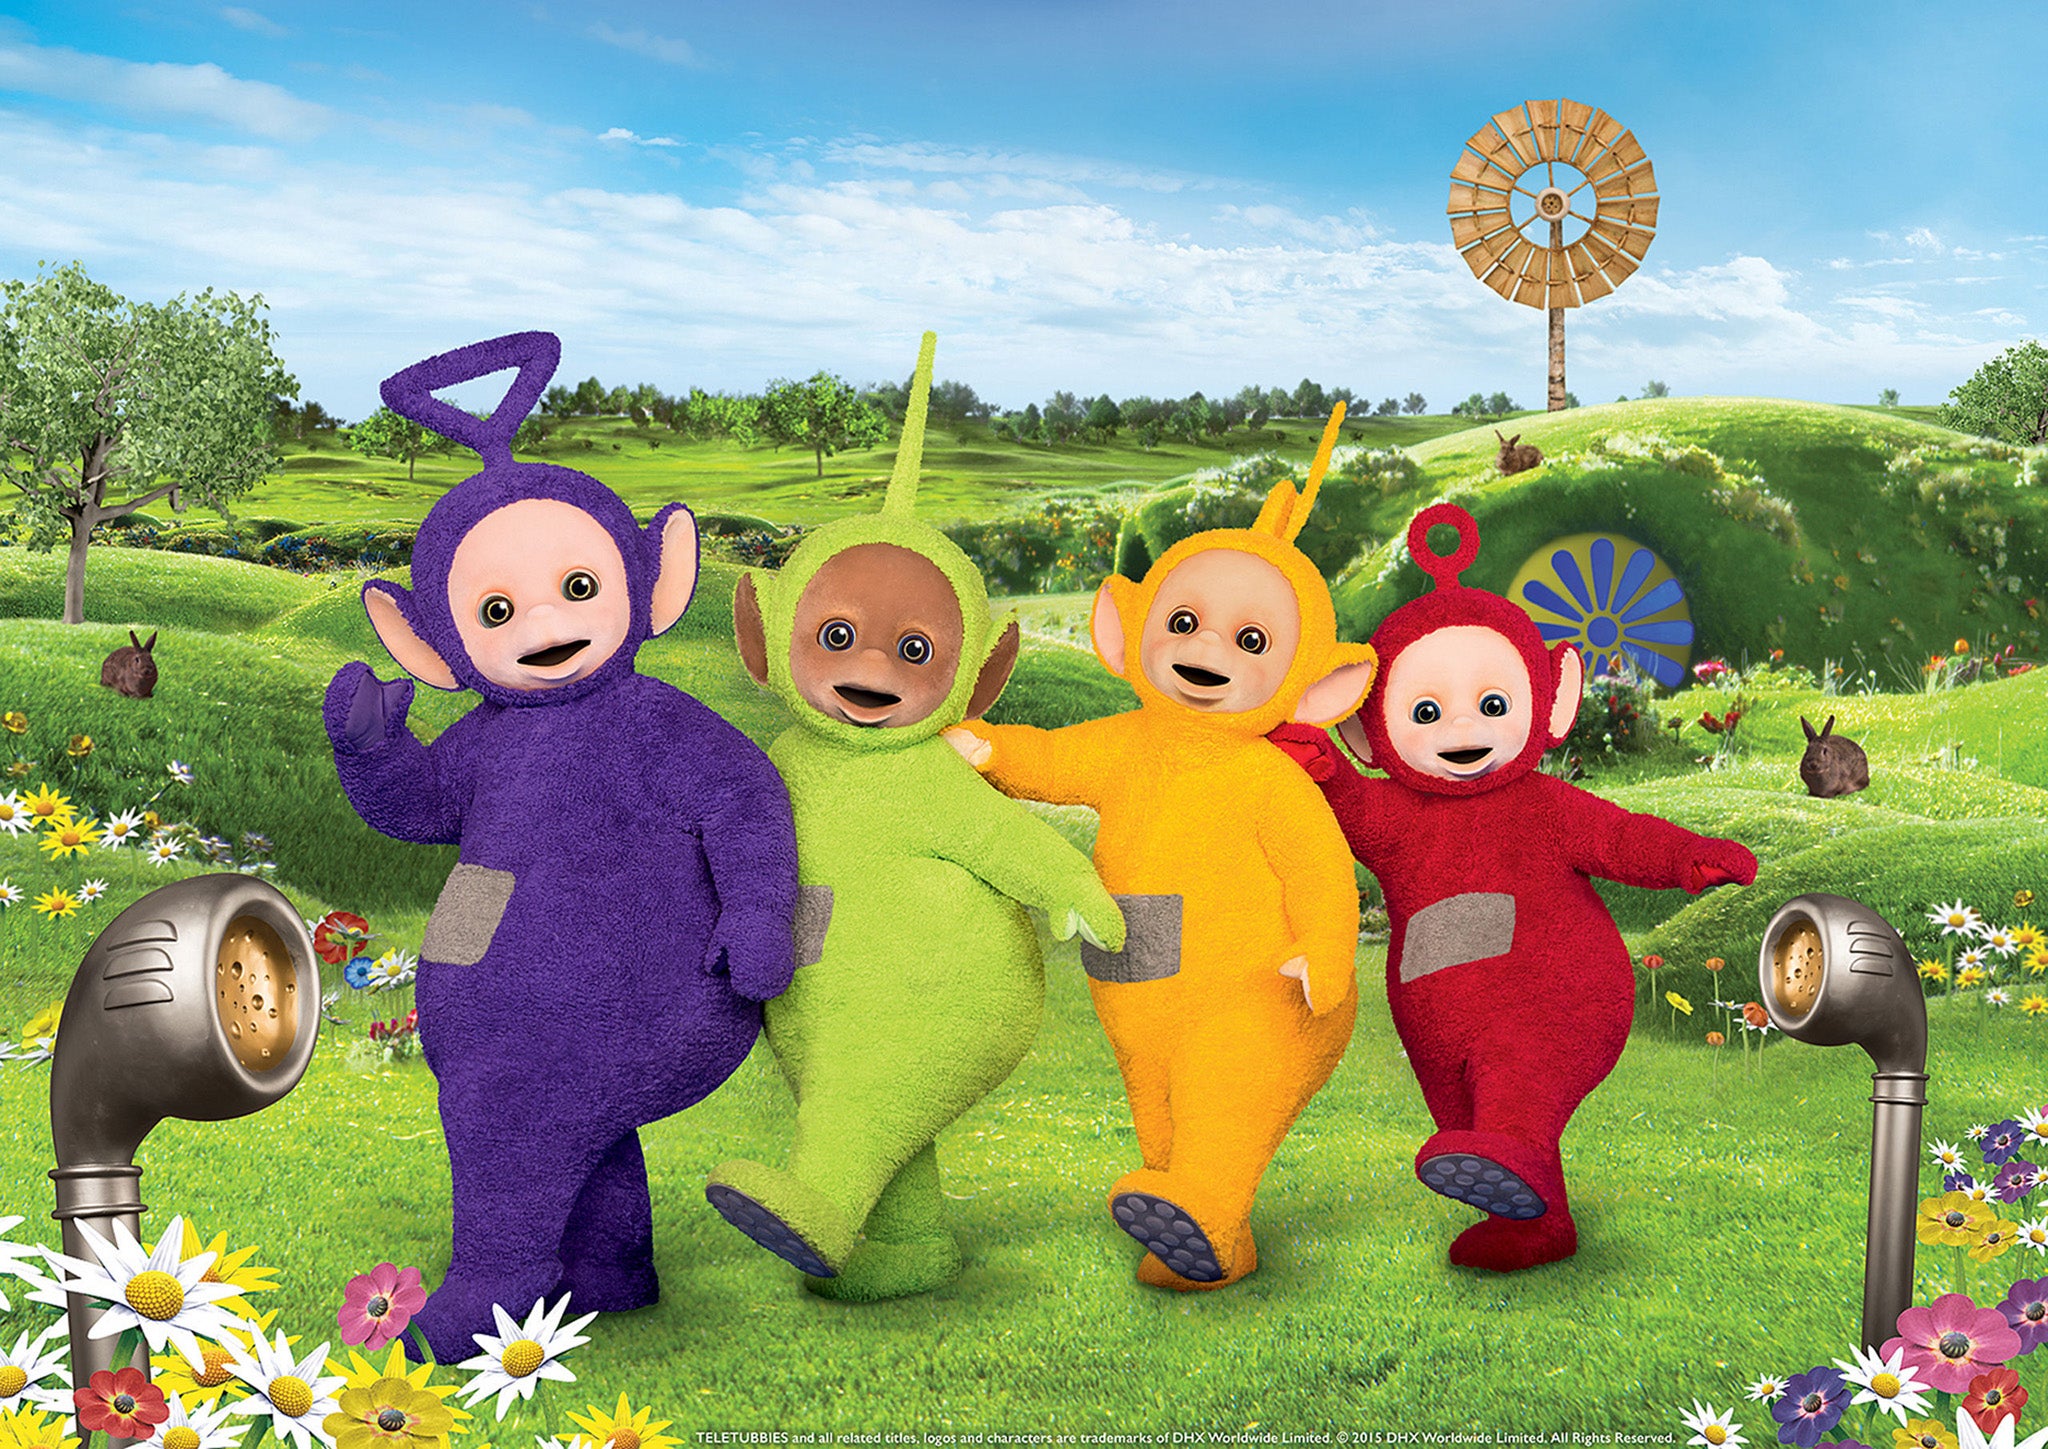 The new Teletubbies, which have been revealed as the classic show is returning, almost 20 years after Tinky Winky, Dipsy, Laa-Laa and Po made their debut.